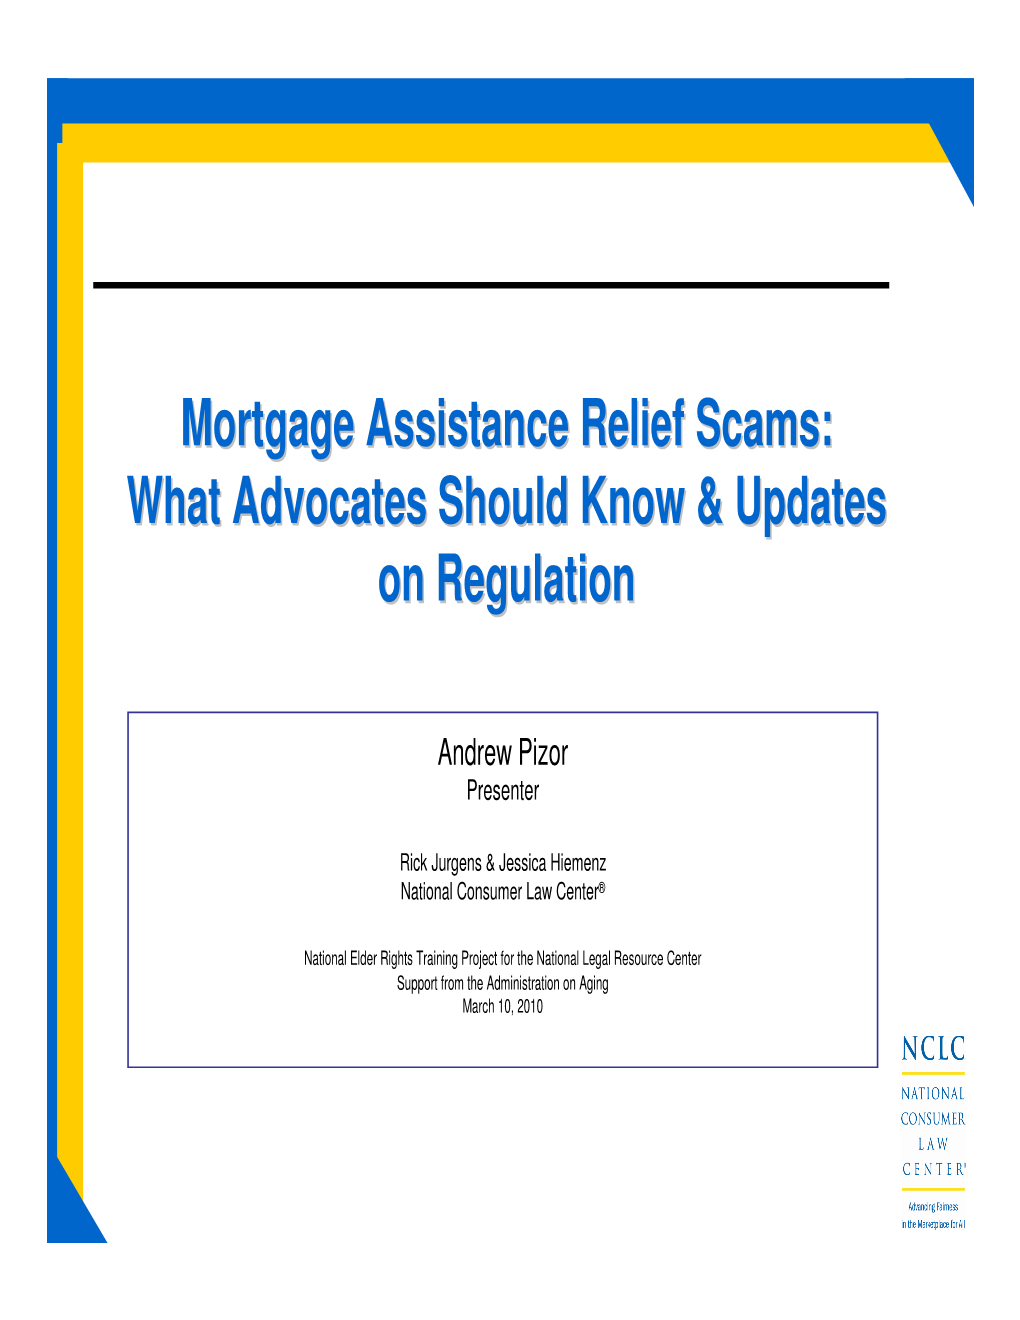 Mortgage Assistance Relief Scams